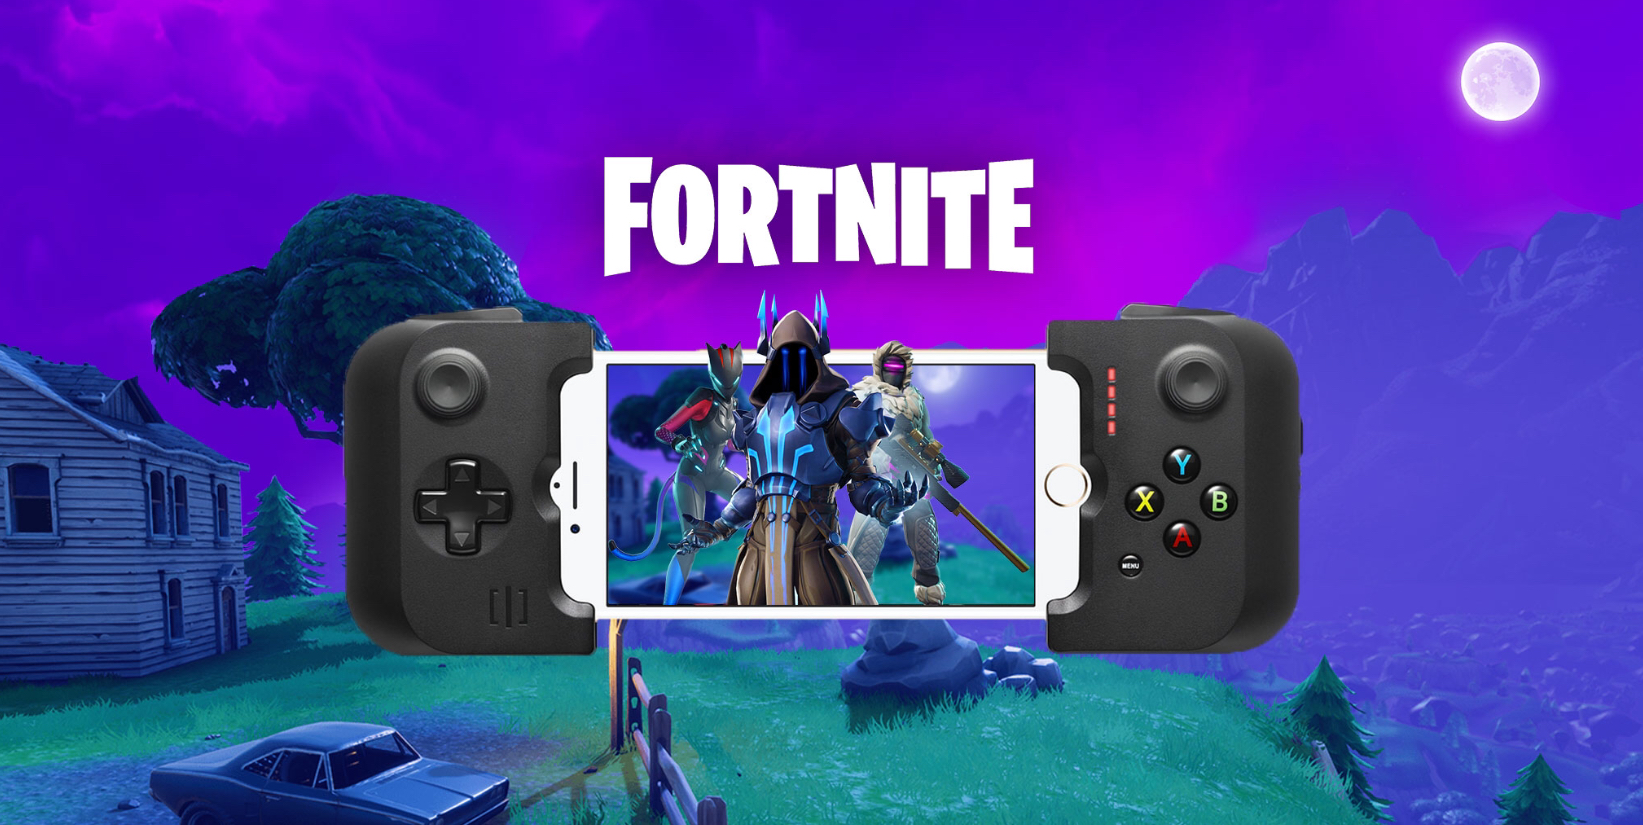 Fortnite Pc Controller Matchmaking Fortnite Mobile Controller Matchmaking And Customisation Detailed Thanks To Gamevice As Of Patch 7 30 Toucharcade